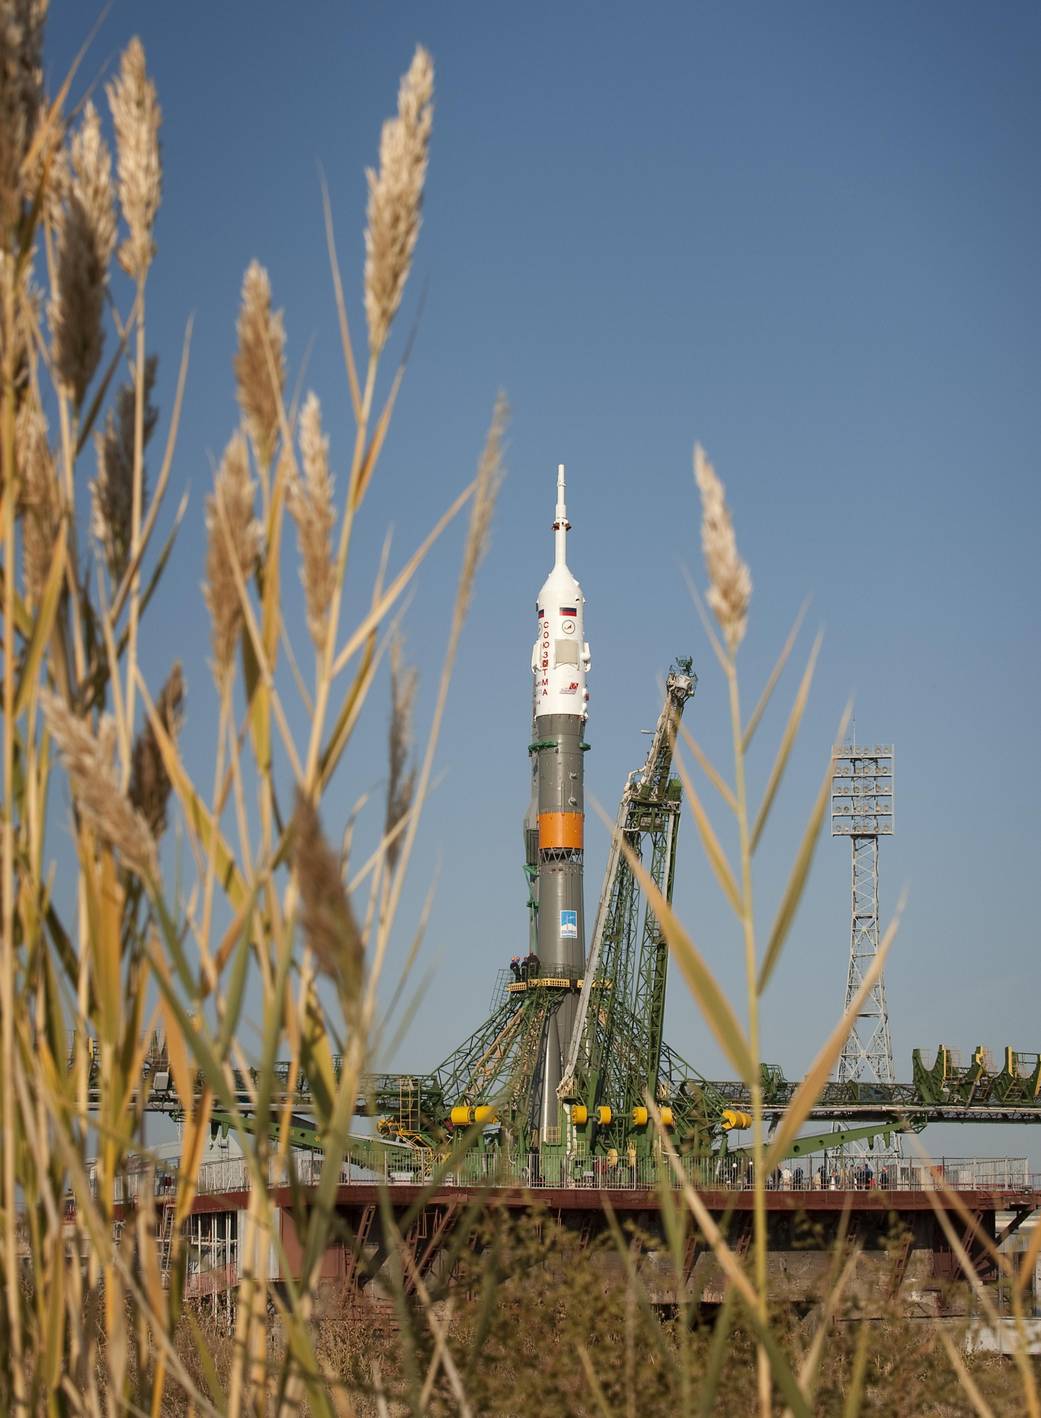 Soyuz rocket vertical on launch pad in distance with plant stalks close up in left of frame